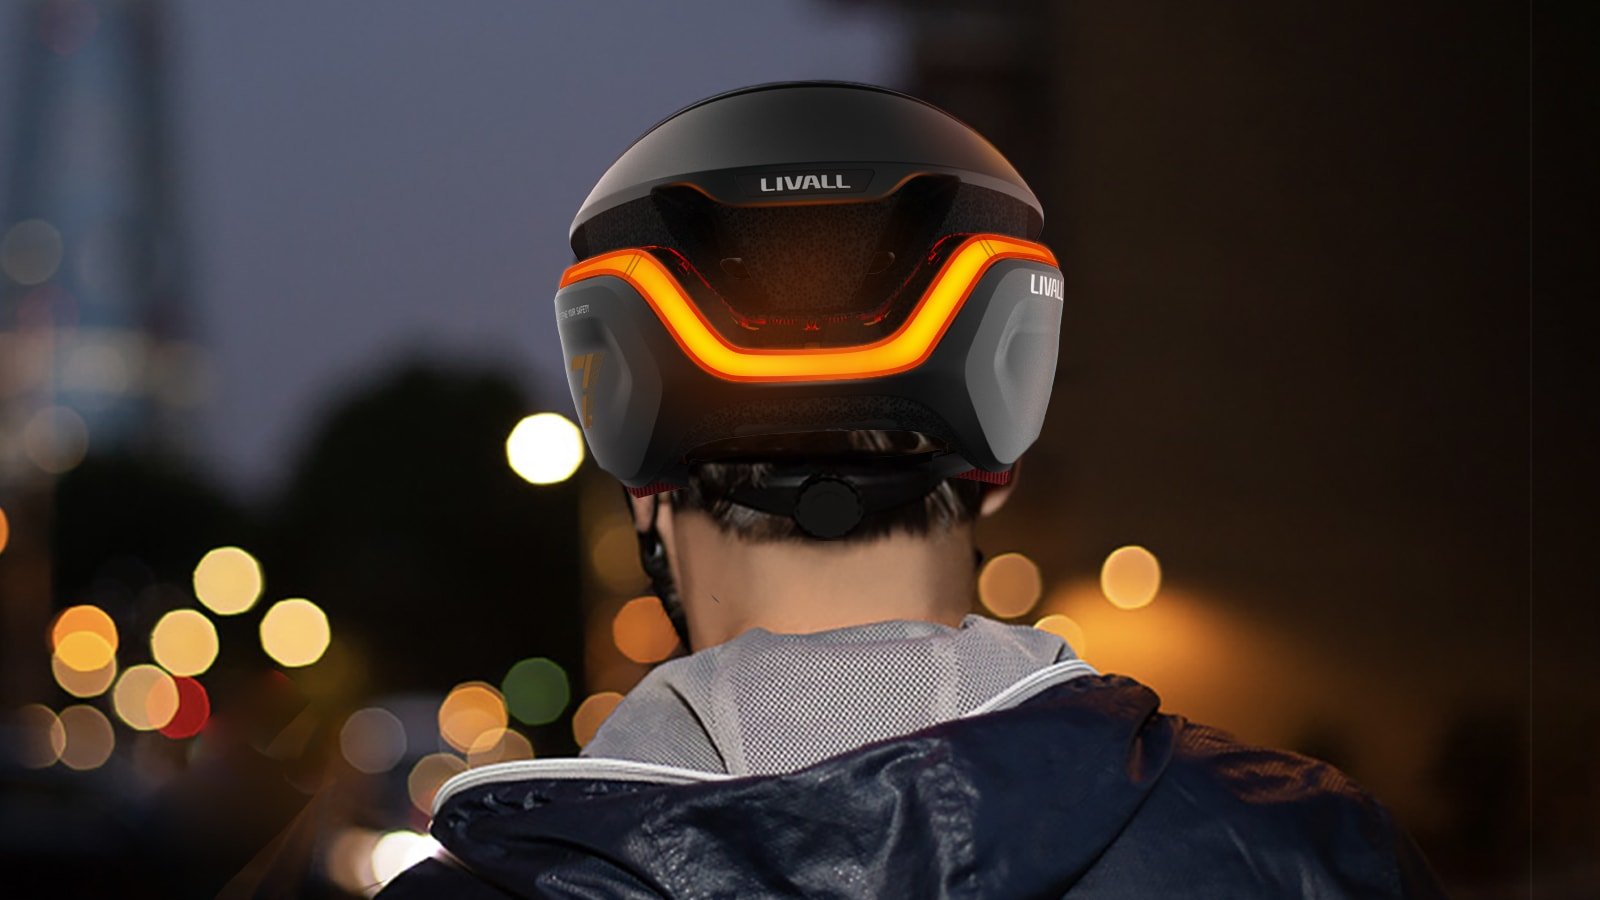 LIVALL EVO21 Smart Helmet has a 270° rear light, patented fall detection, and SOS alerts